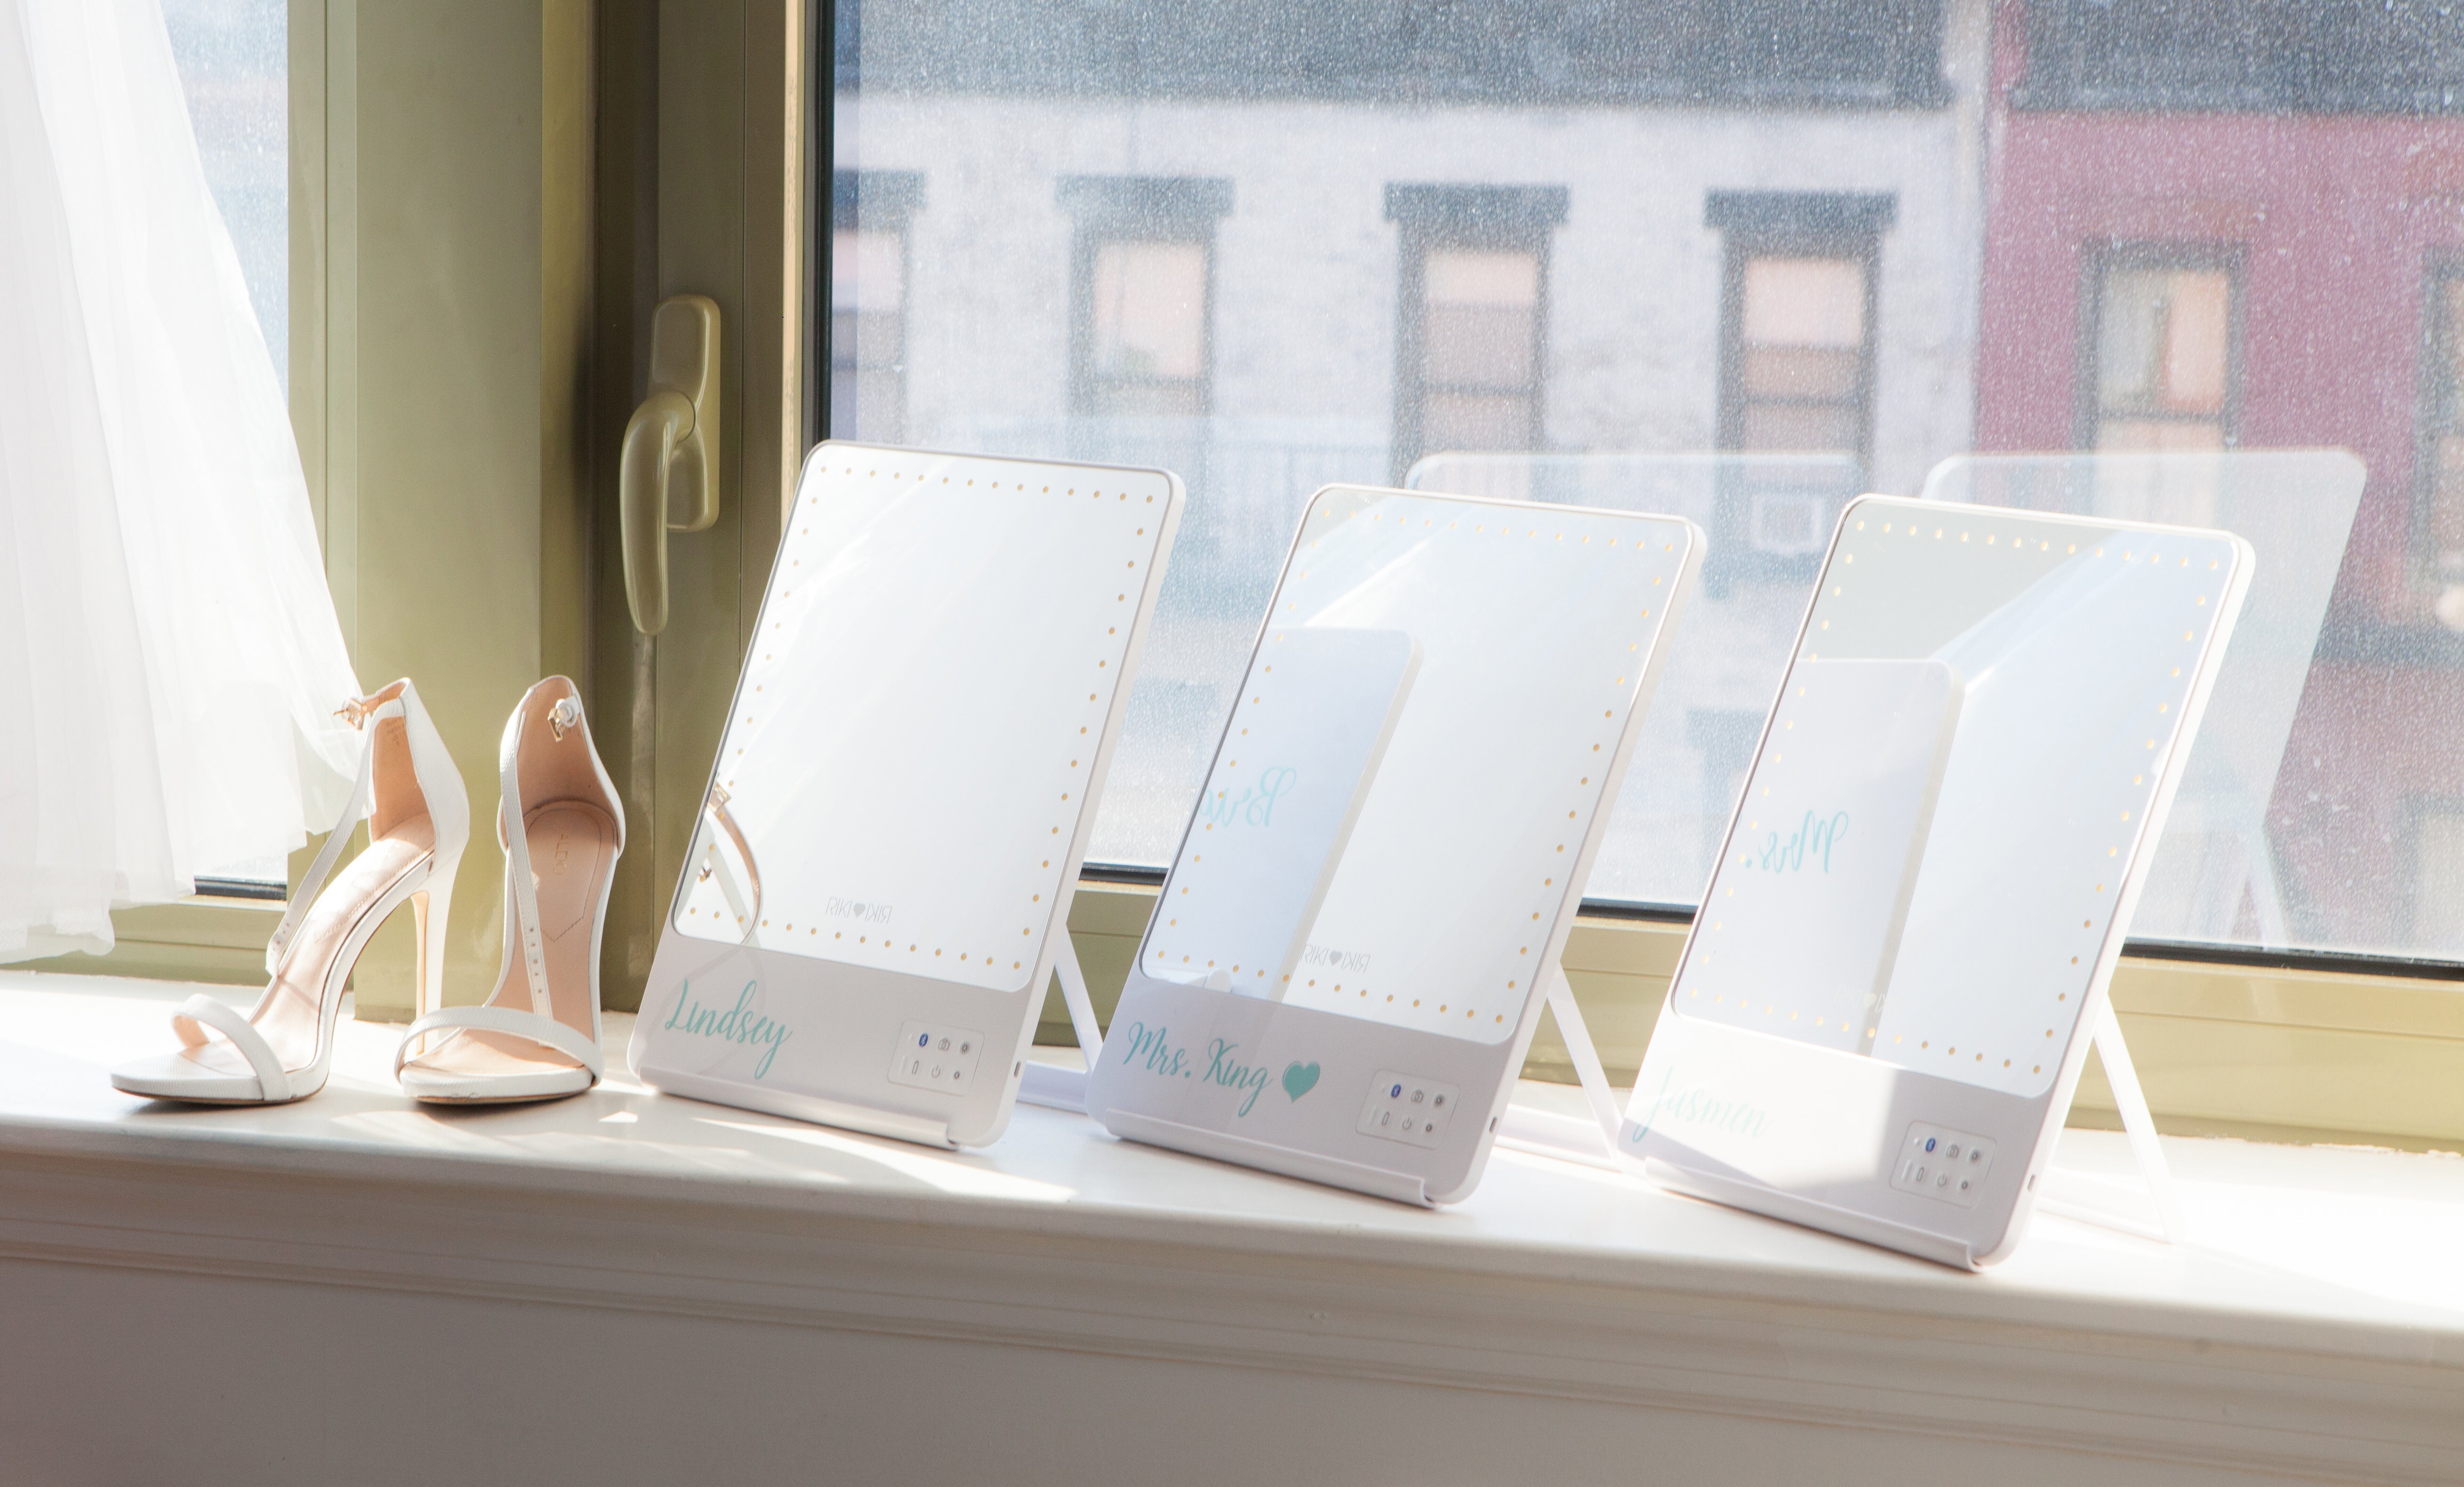 RIKI SKINNY is the Best customizable lighted mirror that is perfect gift for your bridesmaids